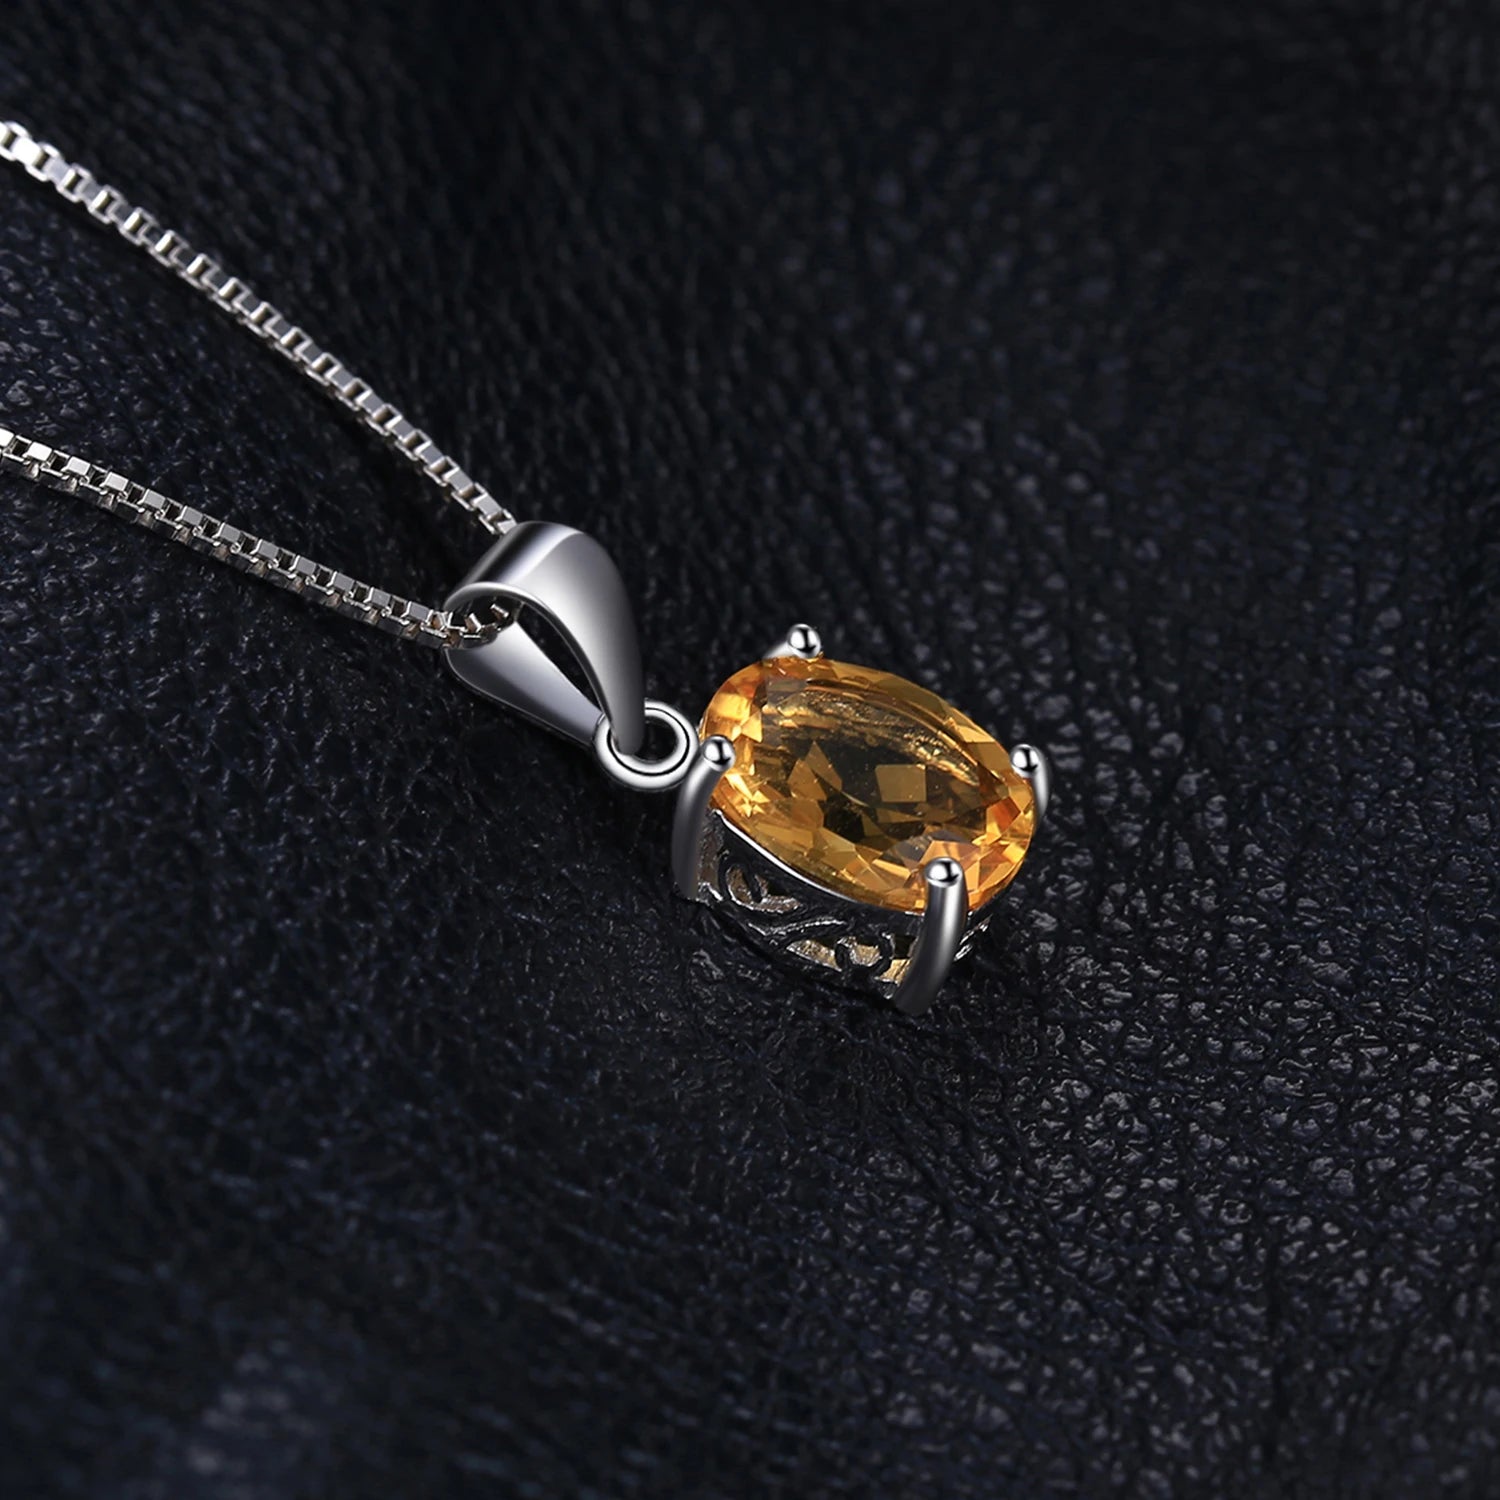 Oval Yellow Genuine Natural Citrine 925 Sterling Silver Pendant Necklace Gemstone Necklace for Women No Chain